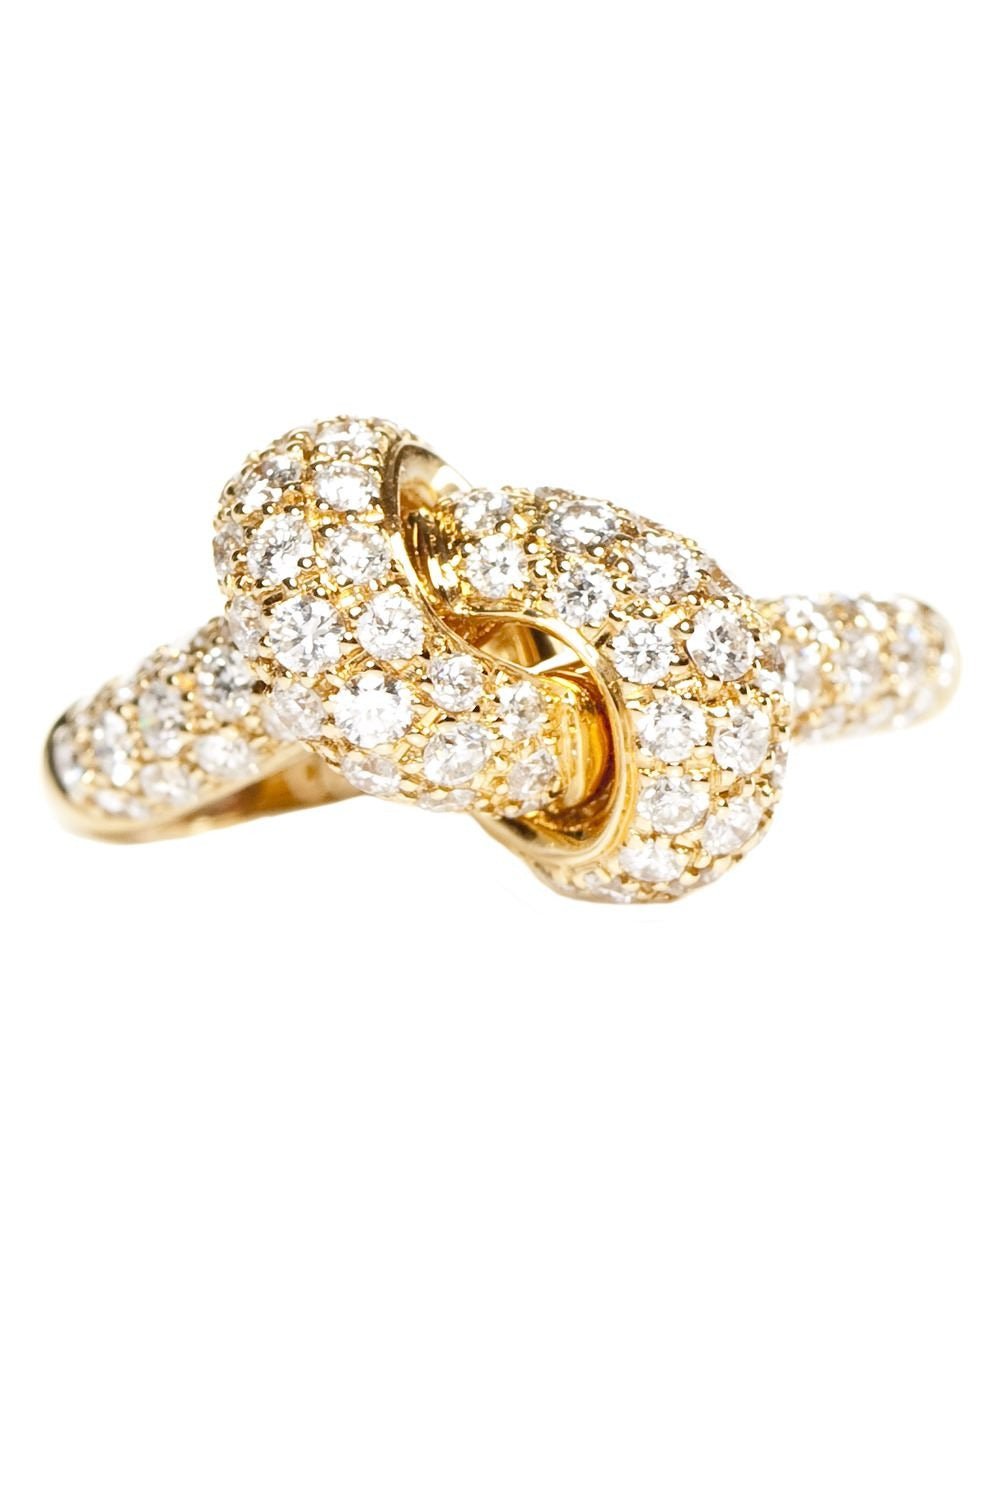 THE LOVE KNOT BY CORALIE-Diamond Love Knot Ring-YELLOW GOLD